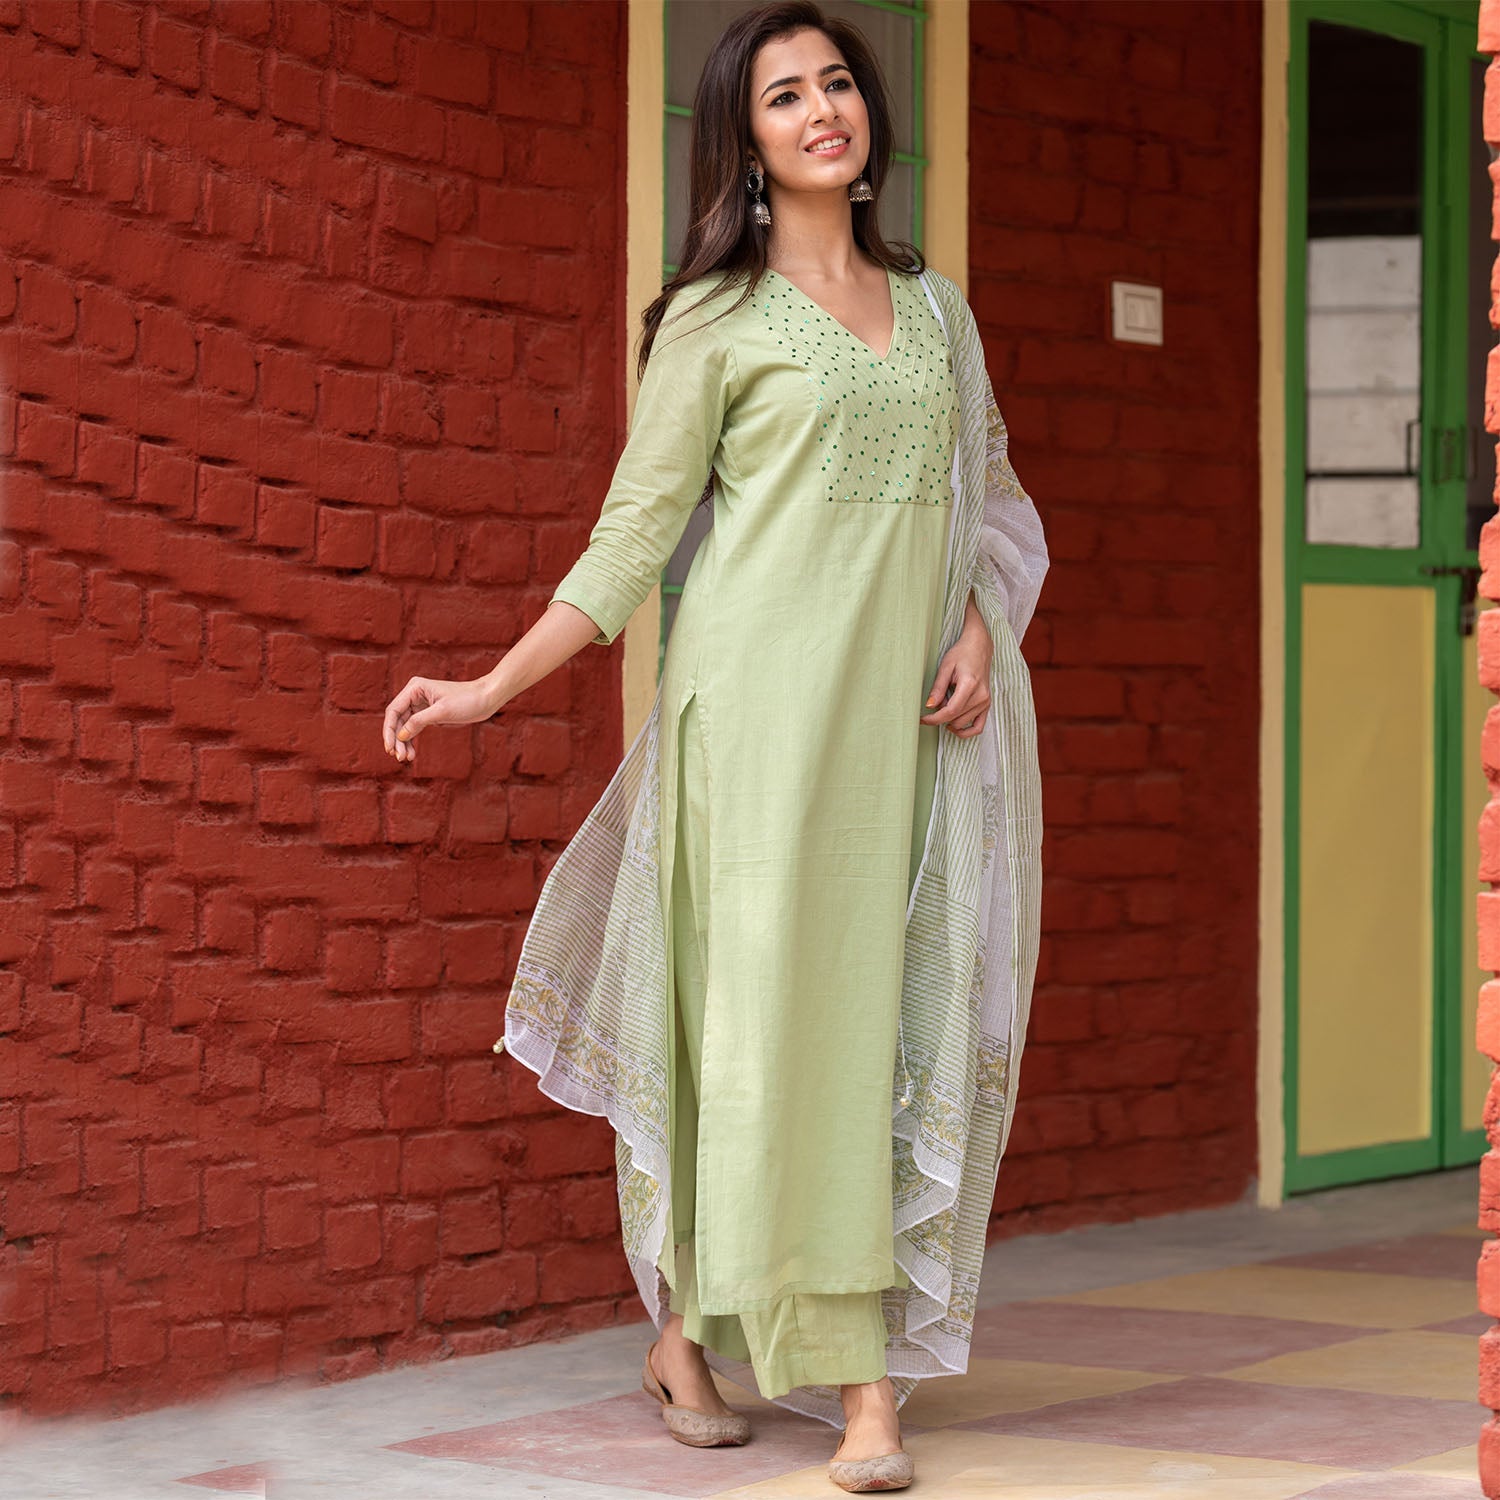 10 Latest Designs of Casual Dresses for Women in Fashion